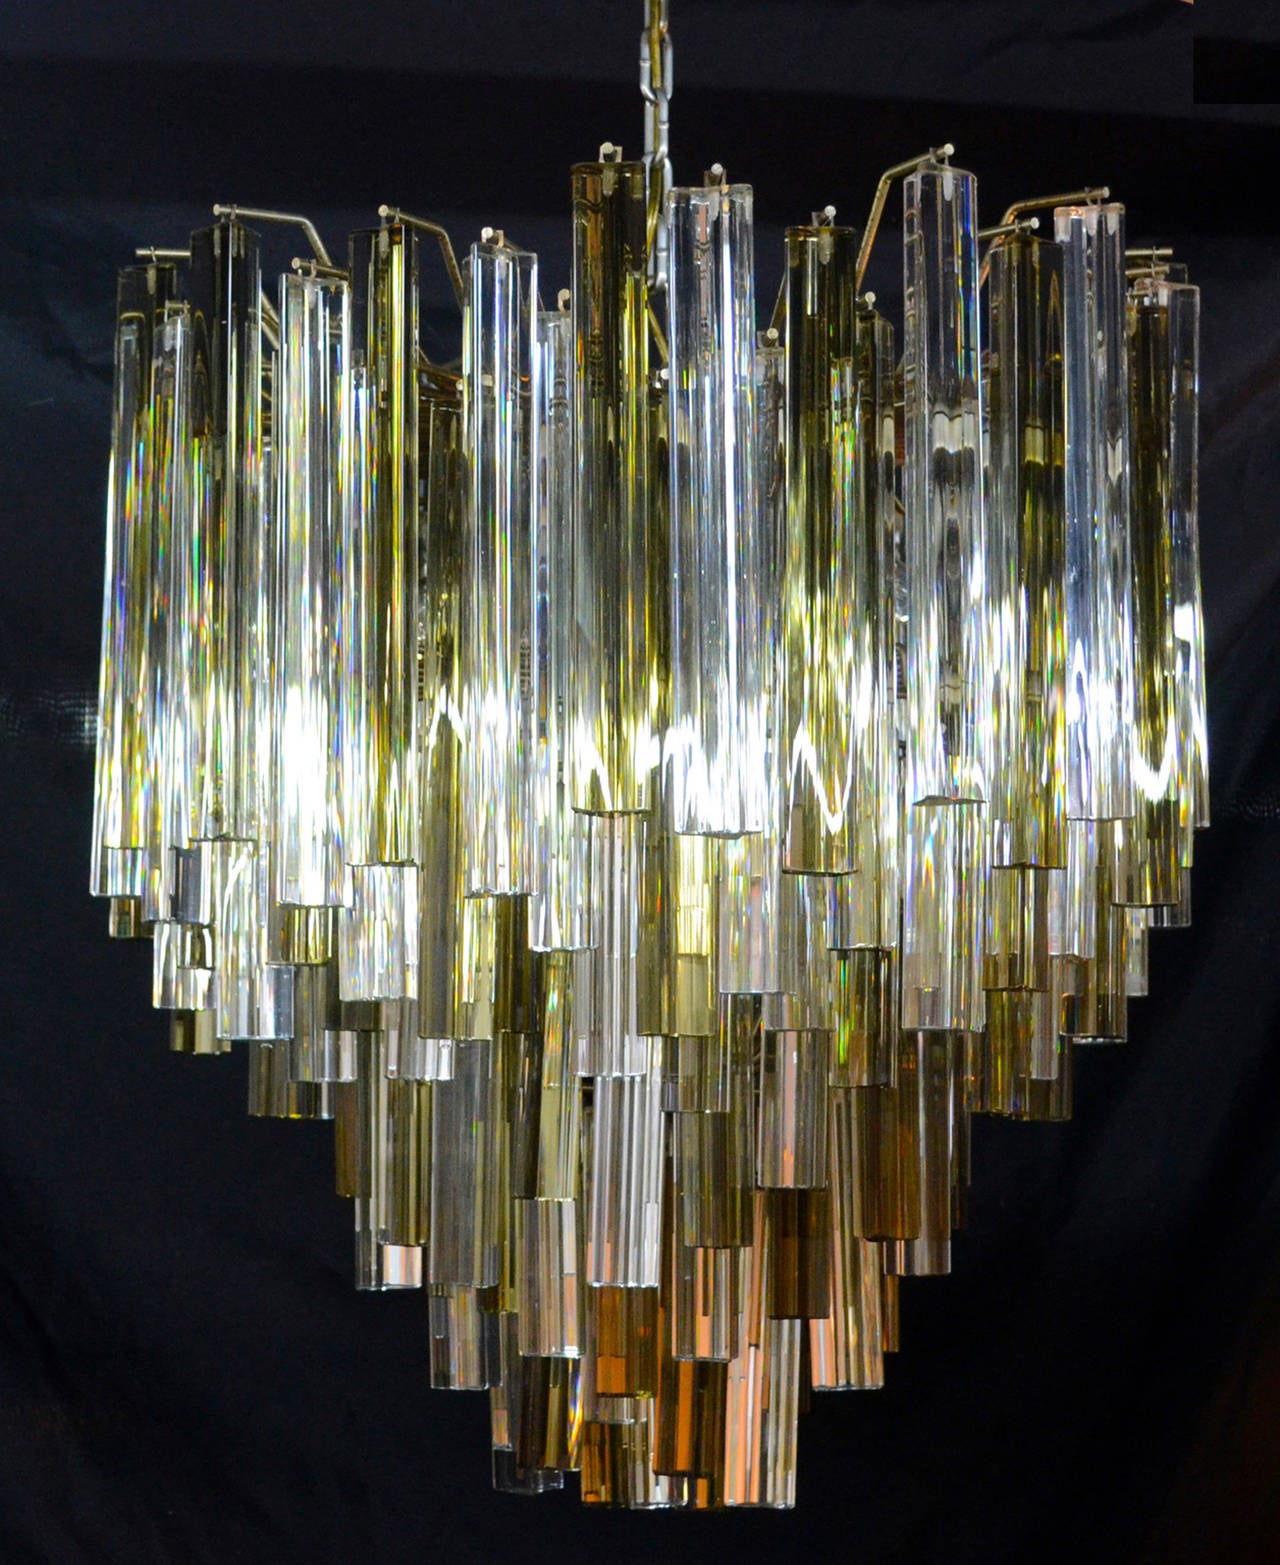 Large 1960s Italian chandelier by Camer (signed) with Murano glass prisms in both smoke and clear.  Chrome frame in tiers.  Outanding design with staggered levels.